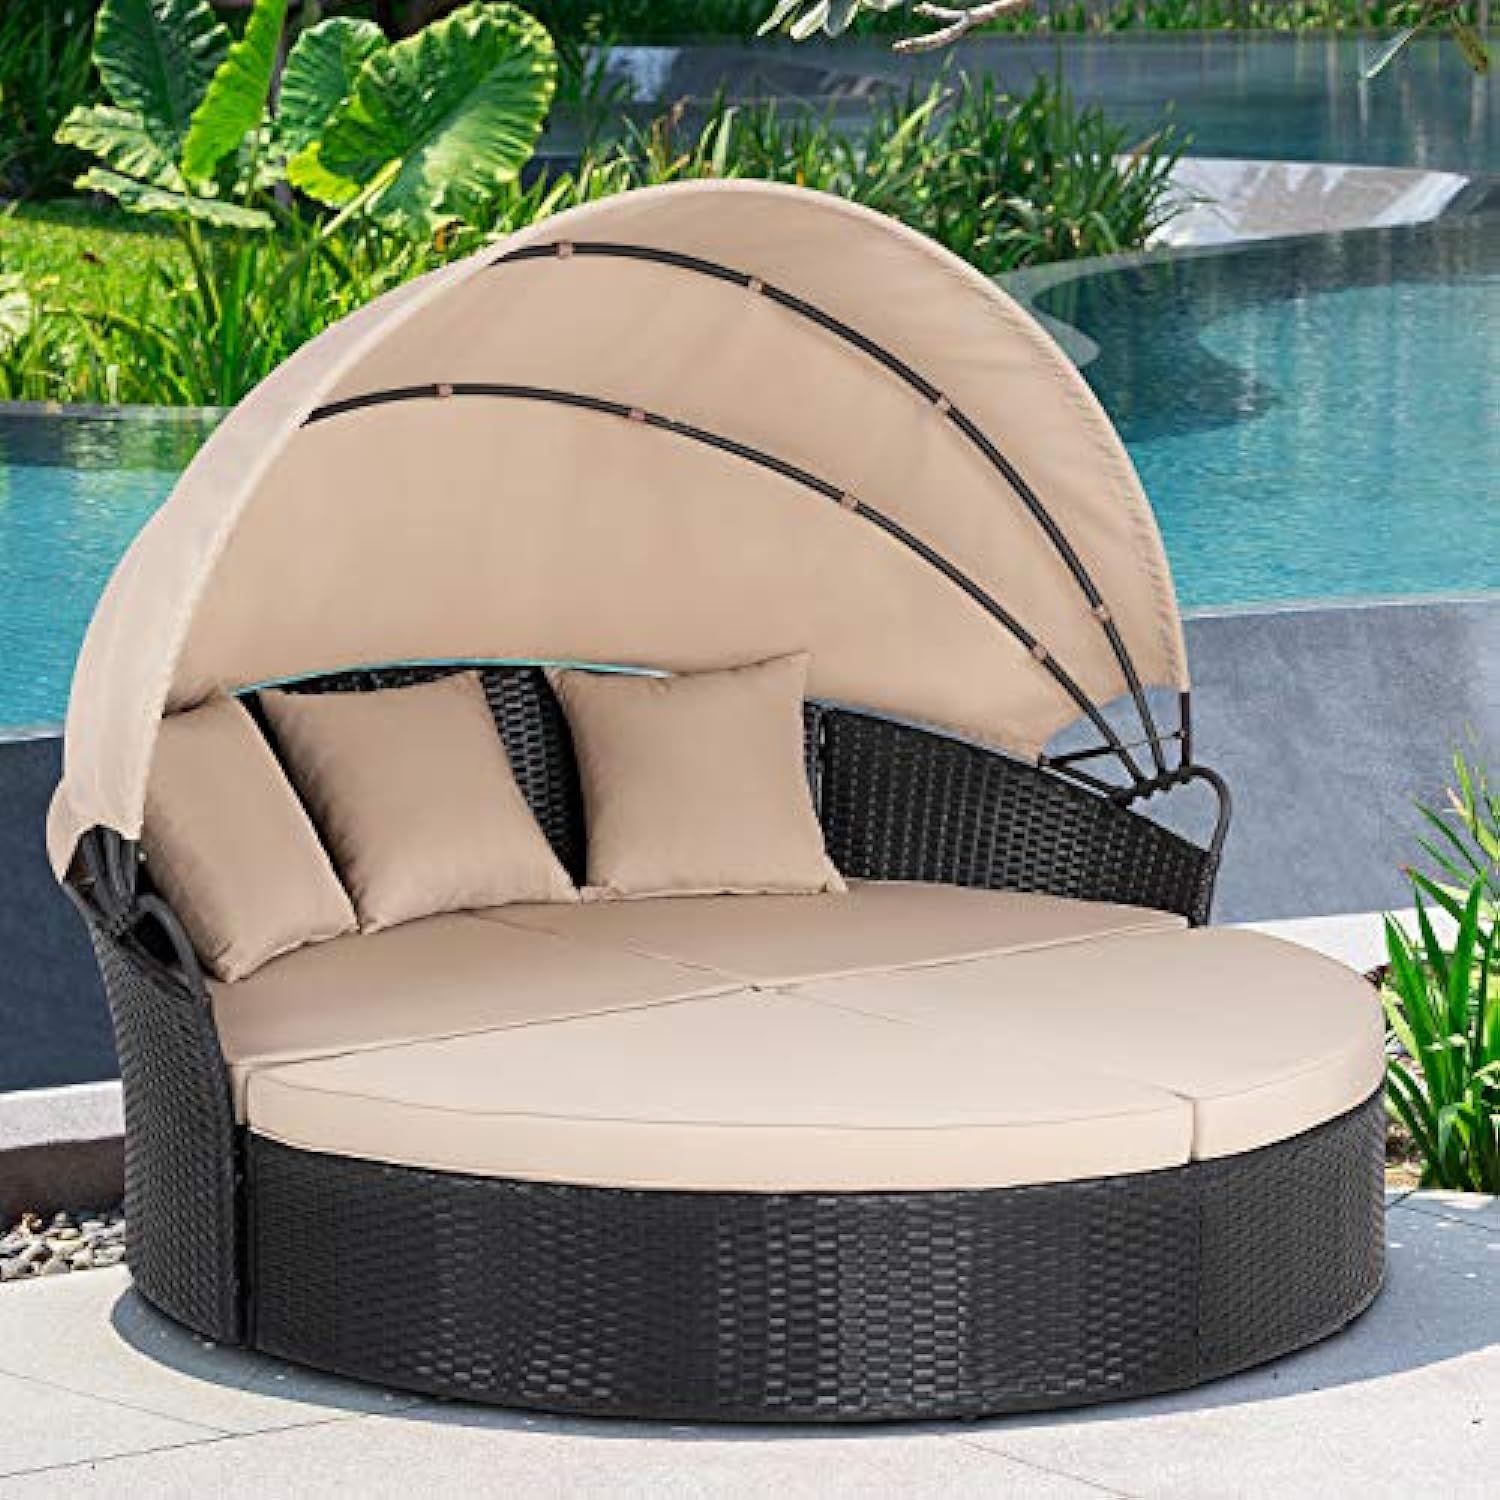 Luxury Outdoor Patio Furniture Outdoor Round Daybed with Retractable Canopy